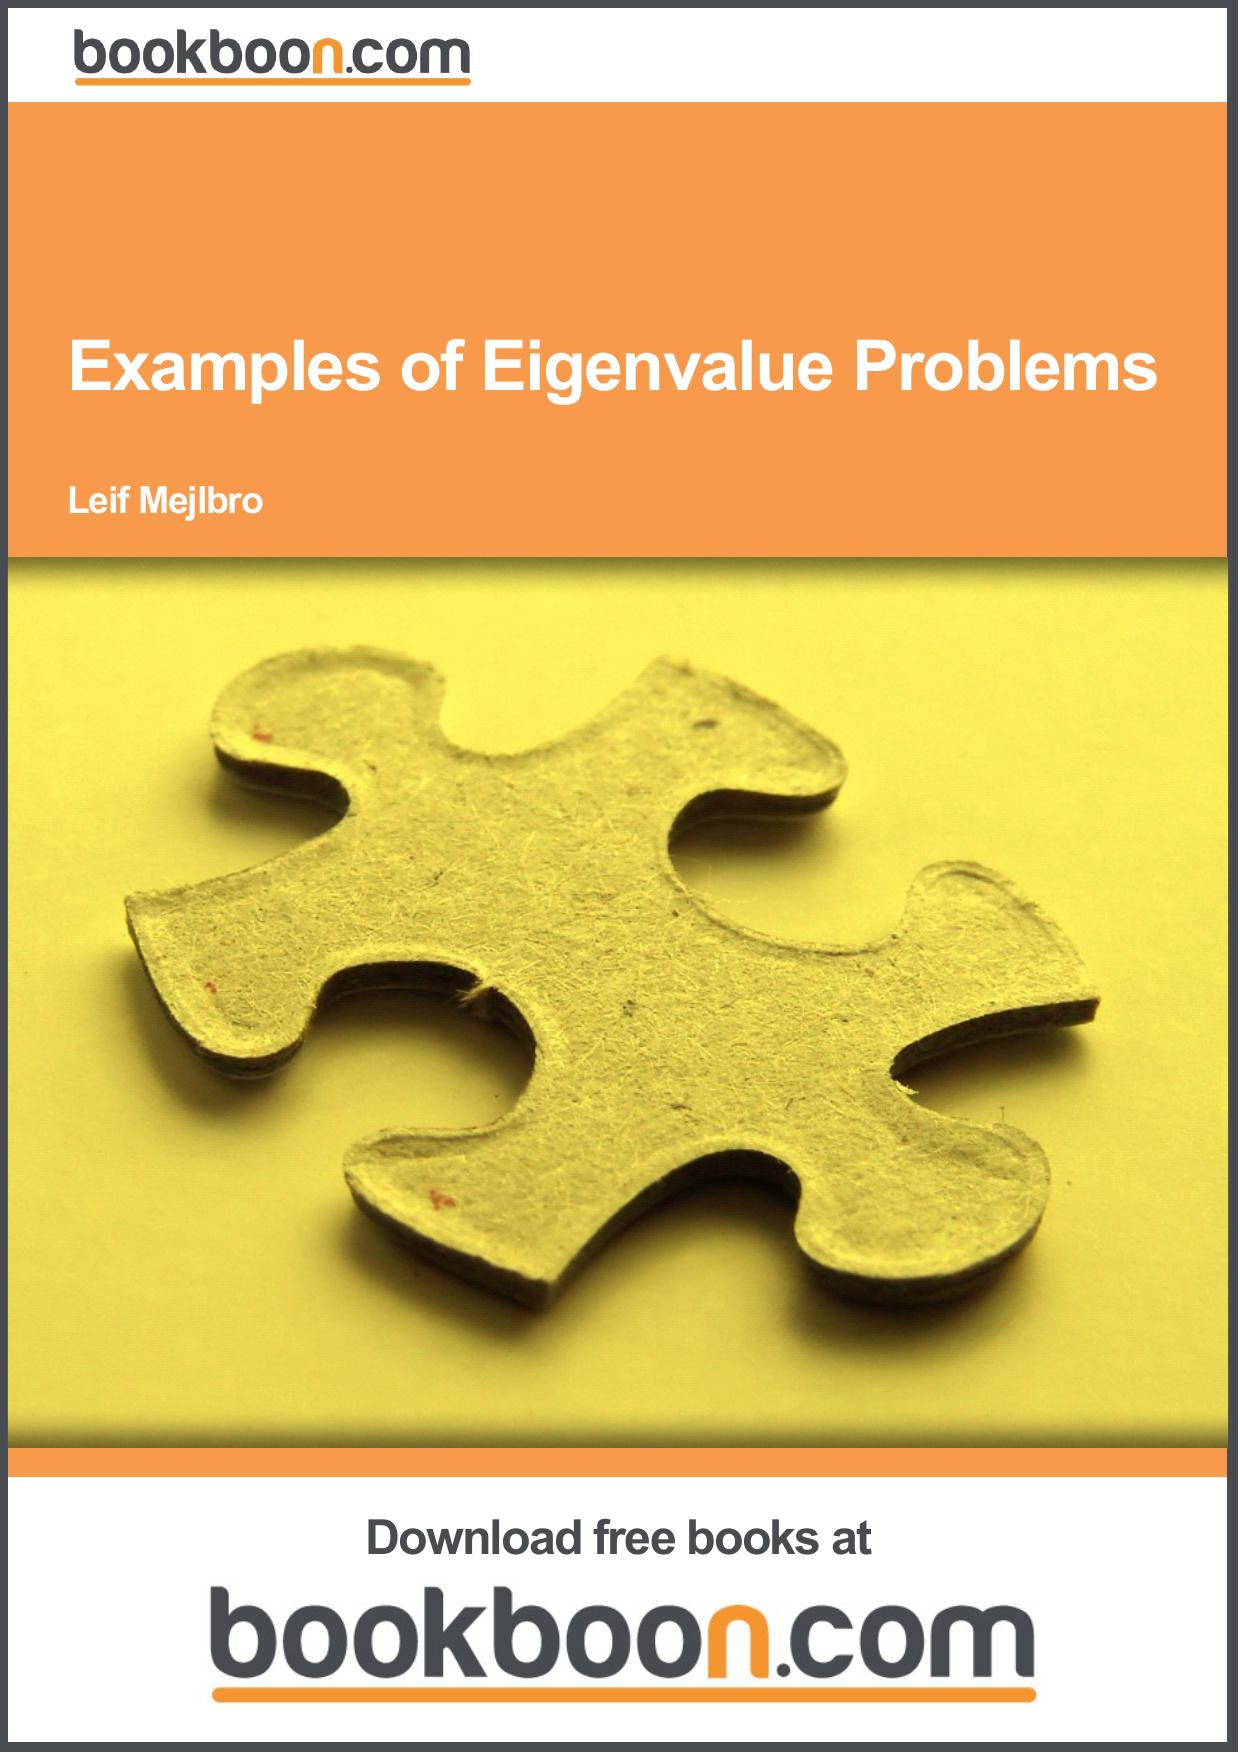 Examples of Eigenvalue Problems